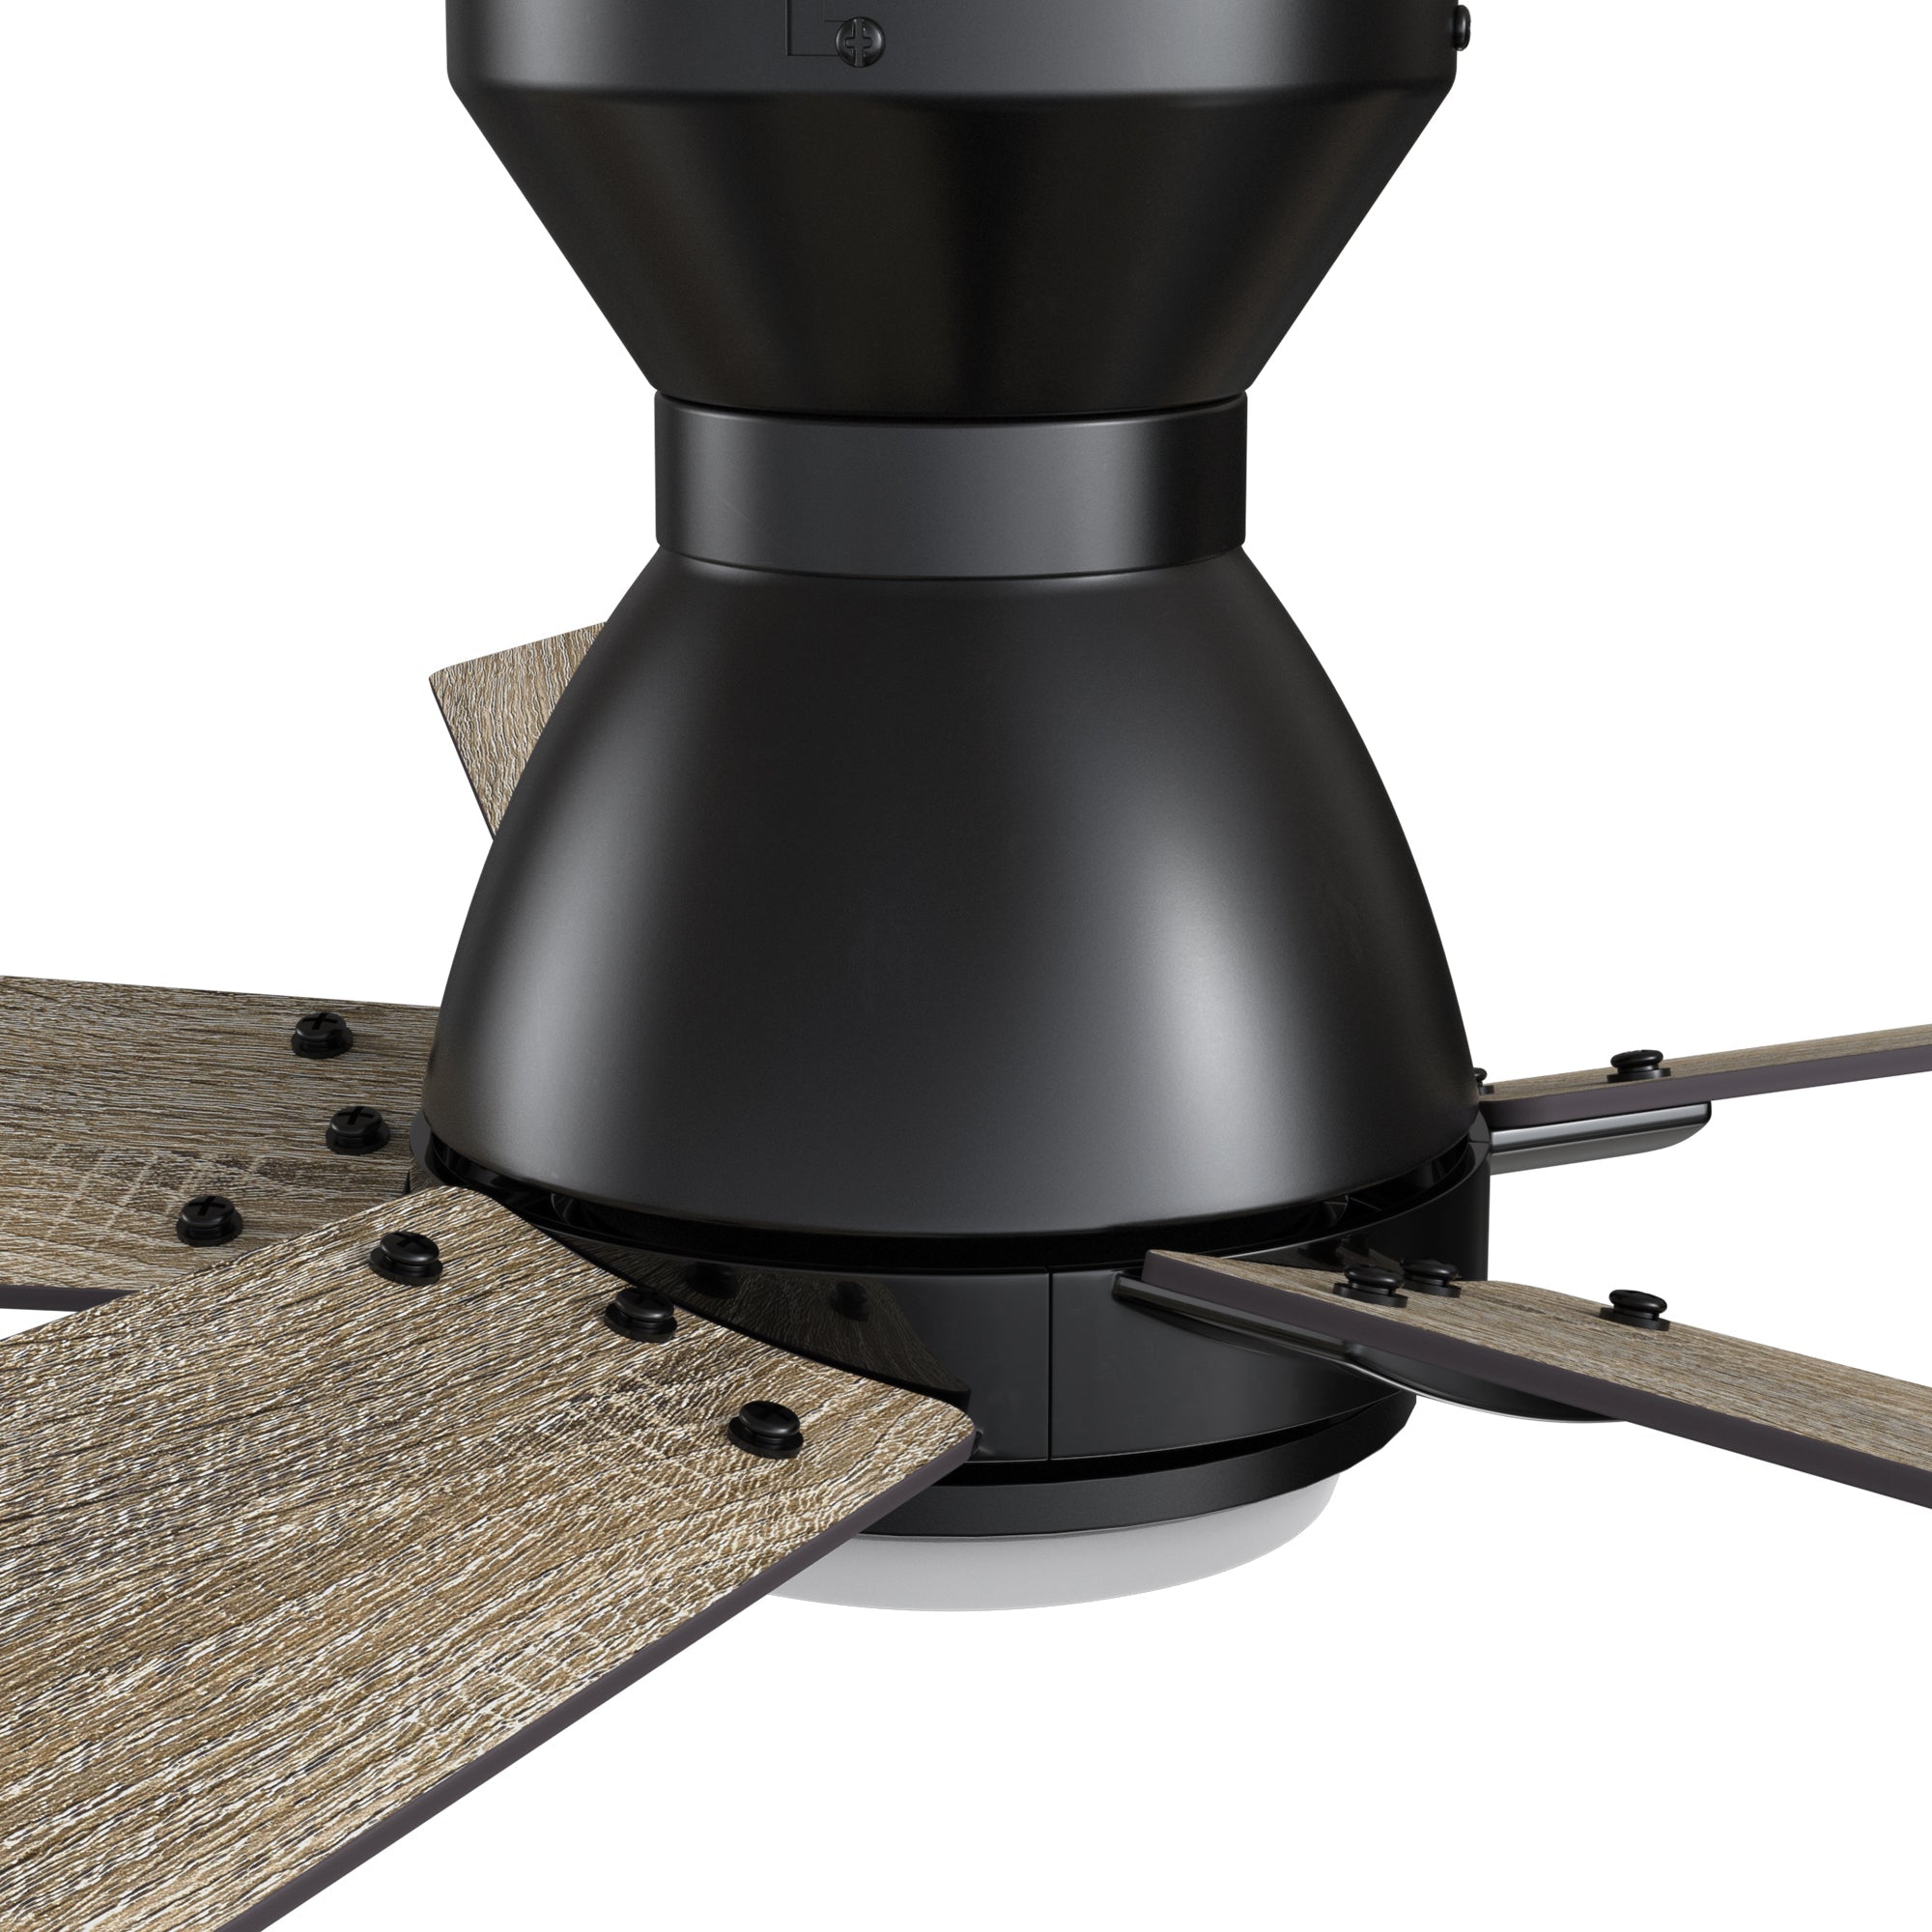 This Aspen 48&#39;&#39; smart ceiling fan keeps your space cool, bright, and stylish. It is a soft modern masterpiece perfect for your large indoor living spaces. This Wifi smart ceiling fan is a simplicity designing with Black finish, use elegant Plywood blades and has an integrated 4000K LED cool light. The fan features Remote control, Wi-Fi apps, Siri Shortcut and Voice control technology (compatible with Amazon Alexa and Google Home Assistant ) to set fan preferences. 